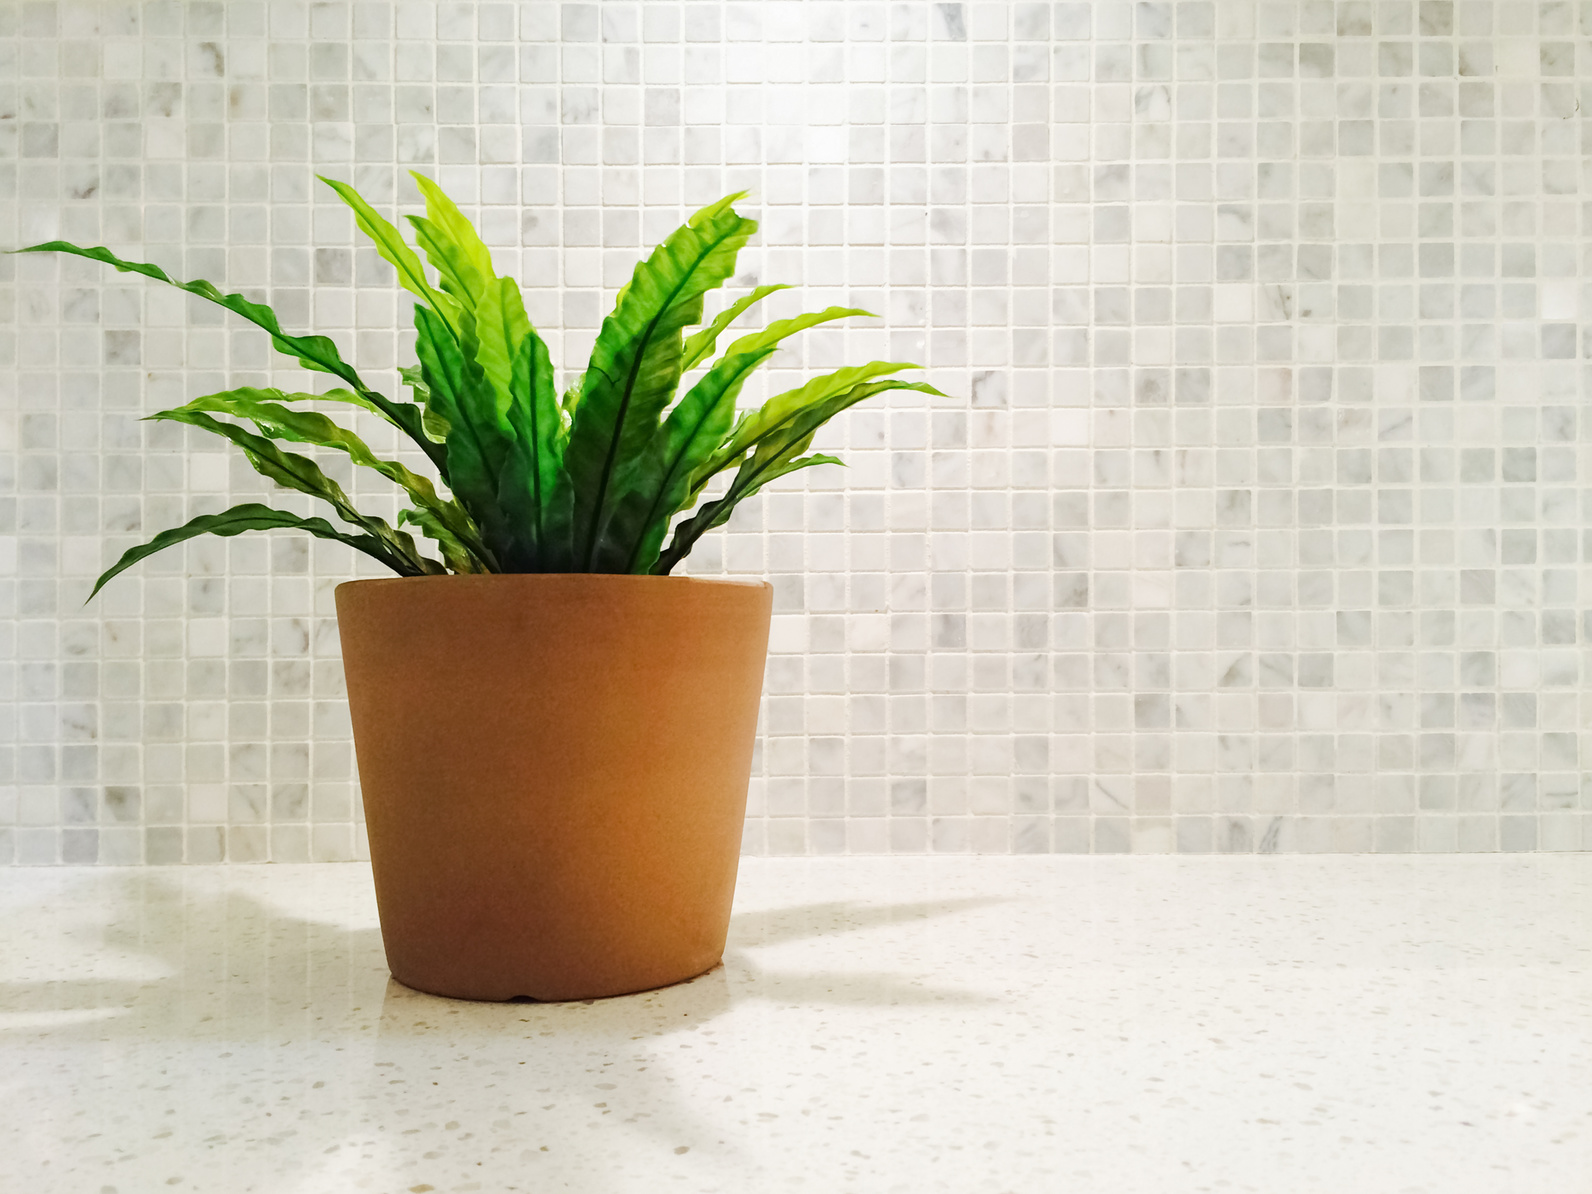 How to Decorate With Kitchen Plants